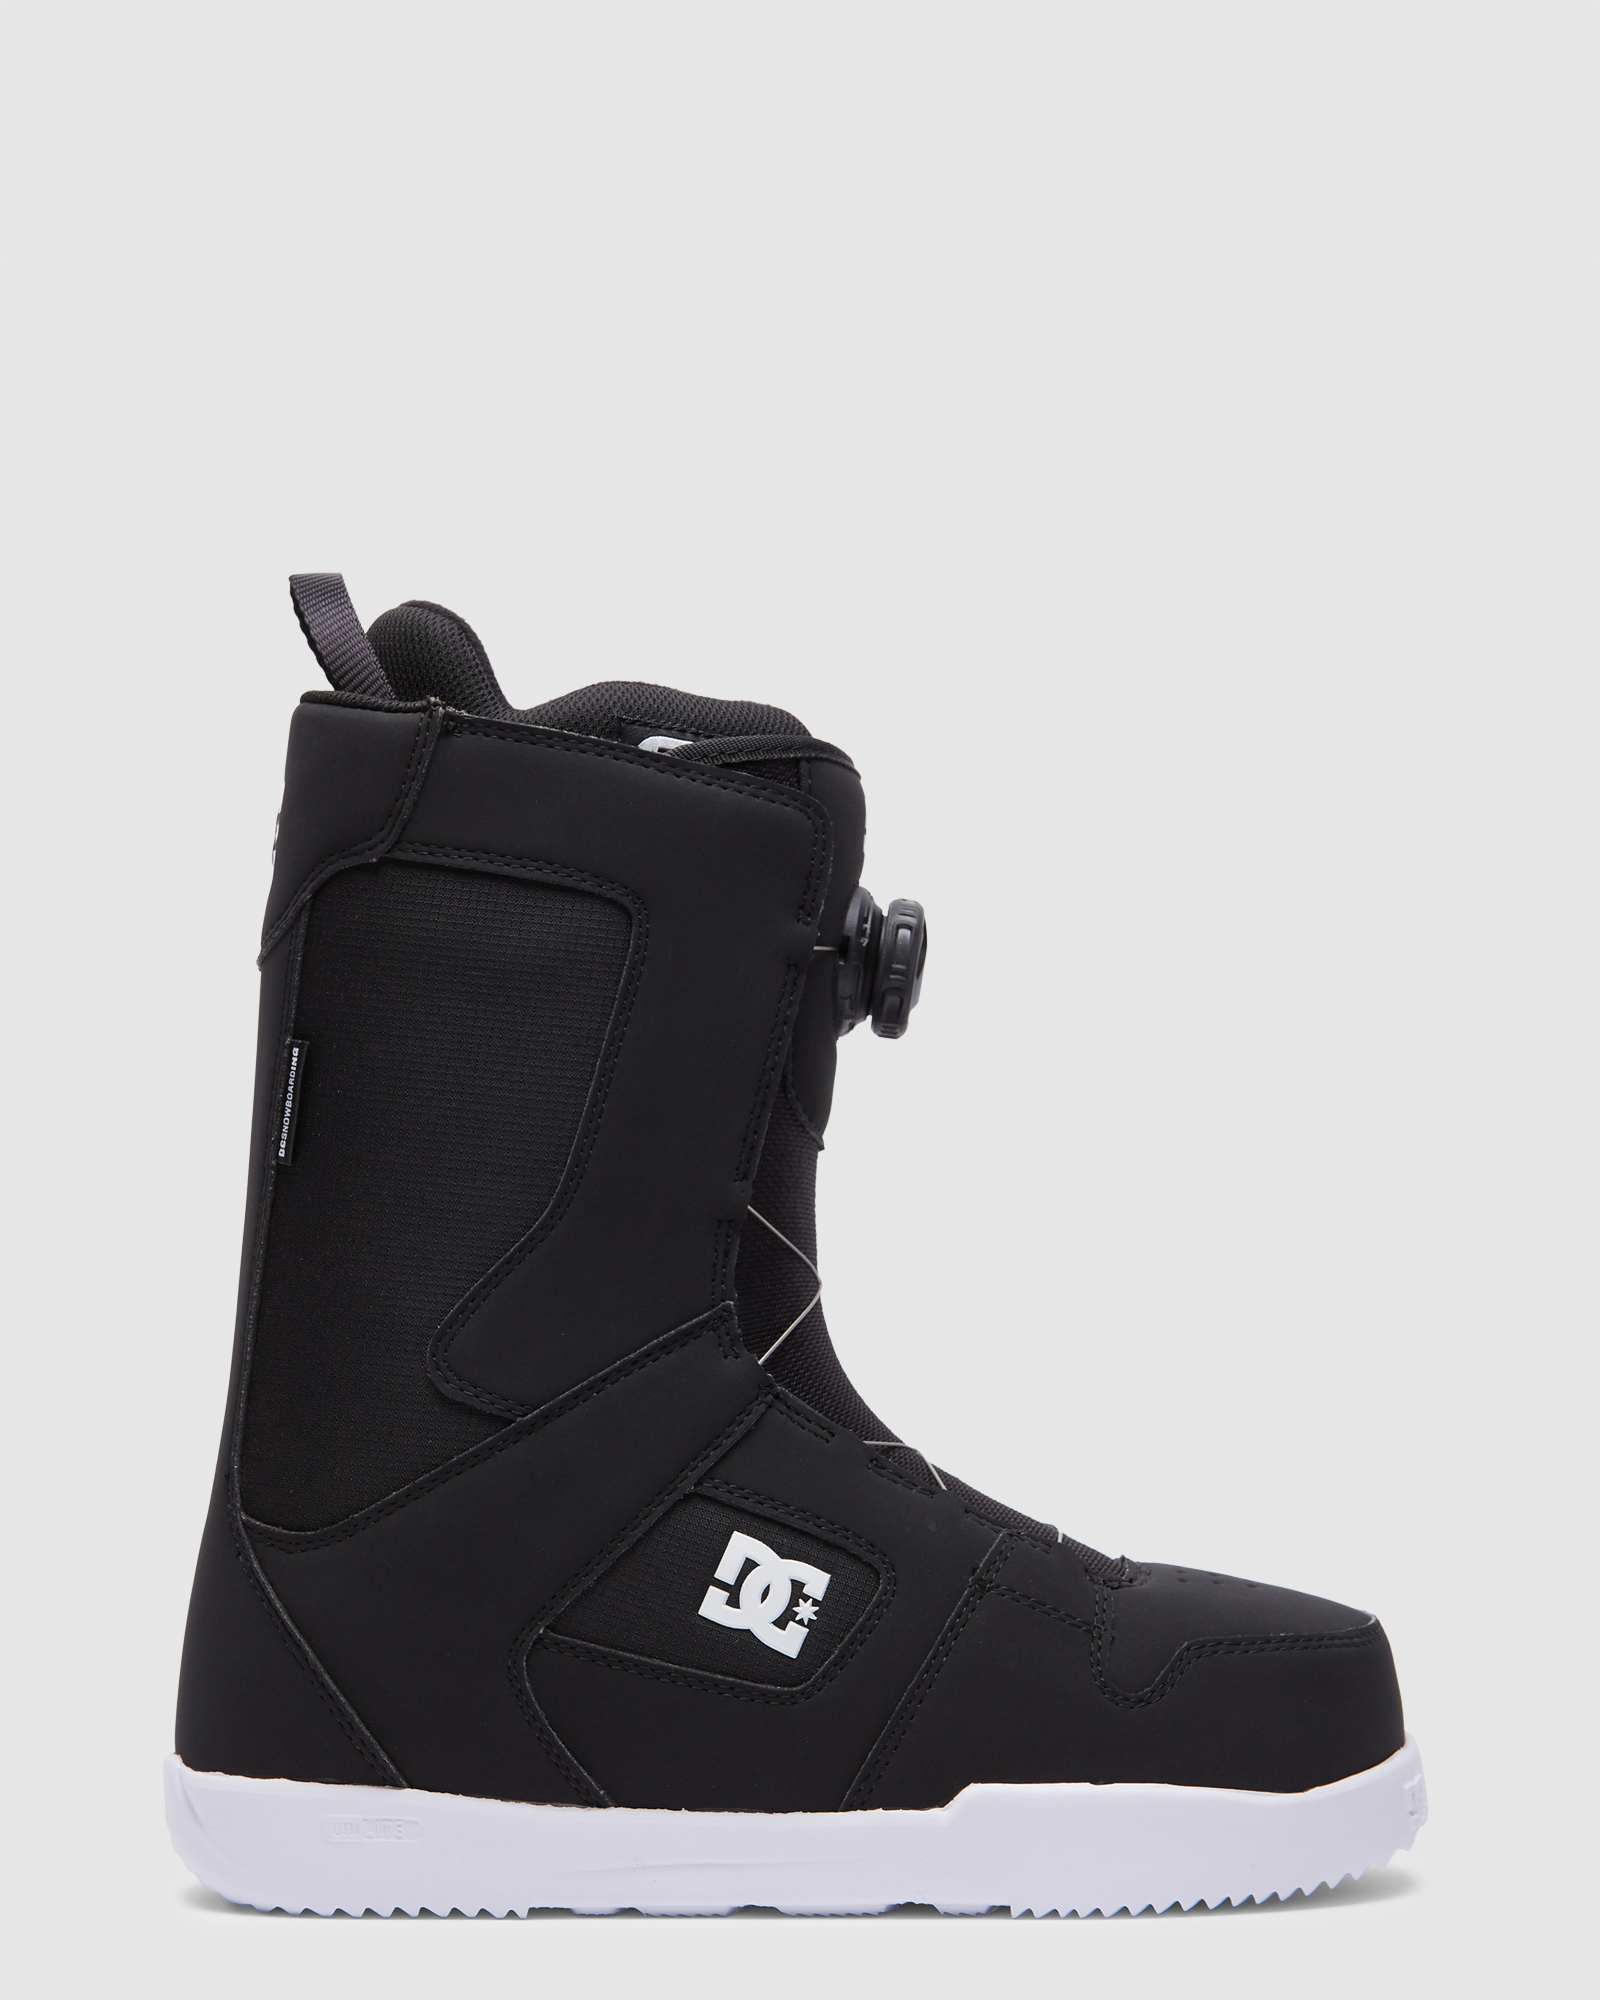 Dc Shoes Phase Boa Snowboard Boot - White | SurfStitch